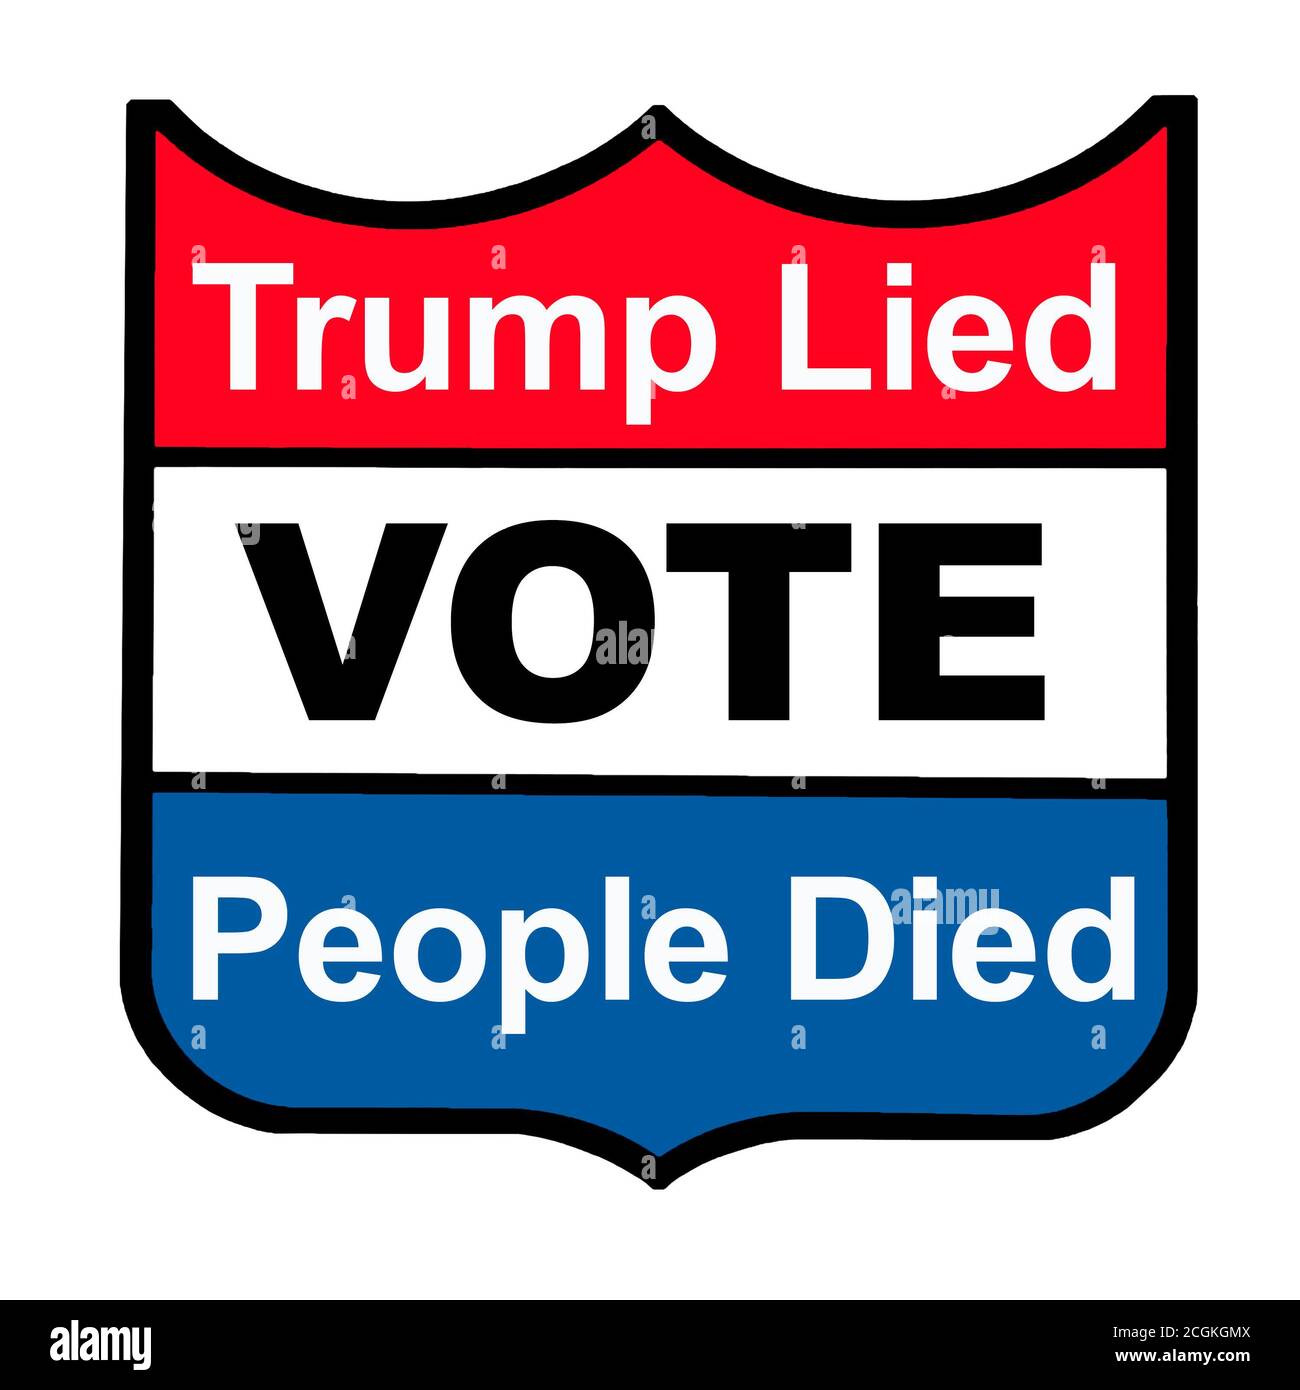 Trump Lied People Died Voting Campaign Emblem Stock Photo